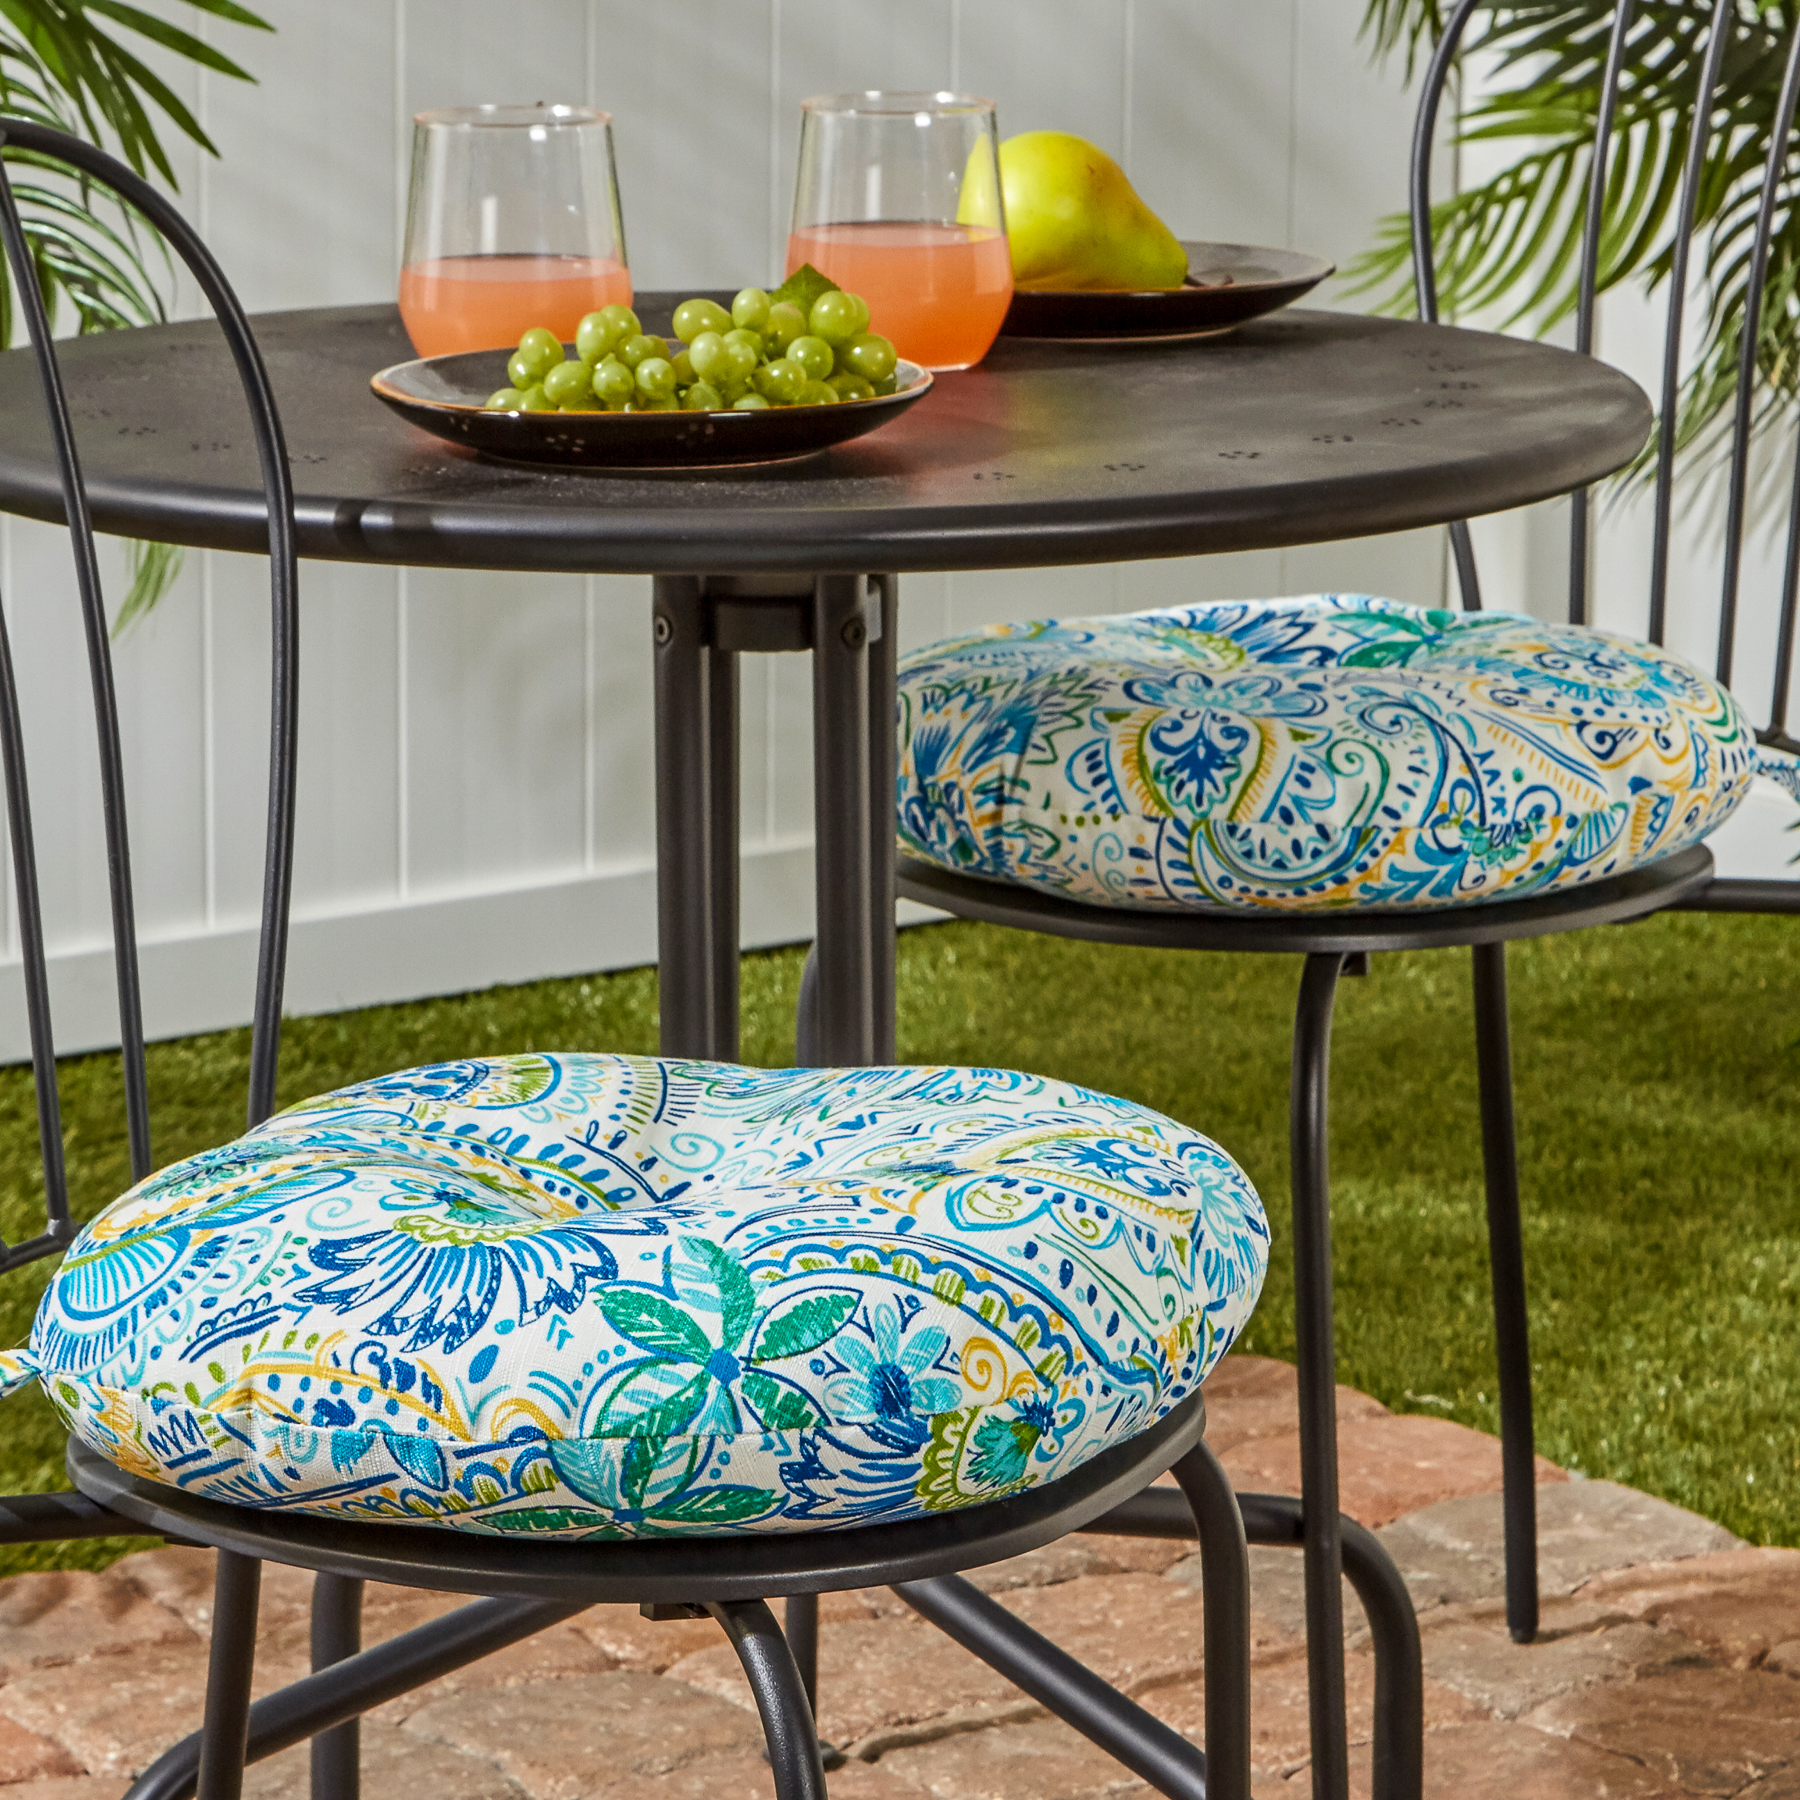 Greendale Home Fashions Baltic Paisley 15 in. Round Outdoor Reversible Bistro Seat Cushion (Set of 2) - image 4 of 6